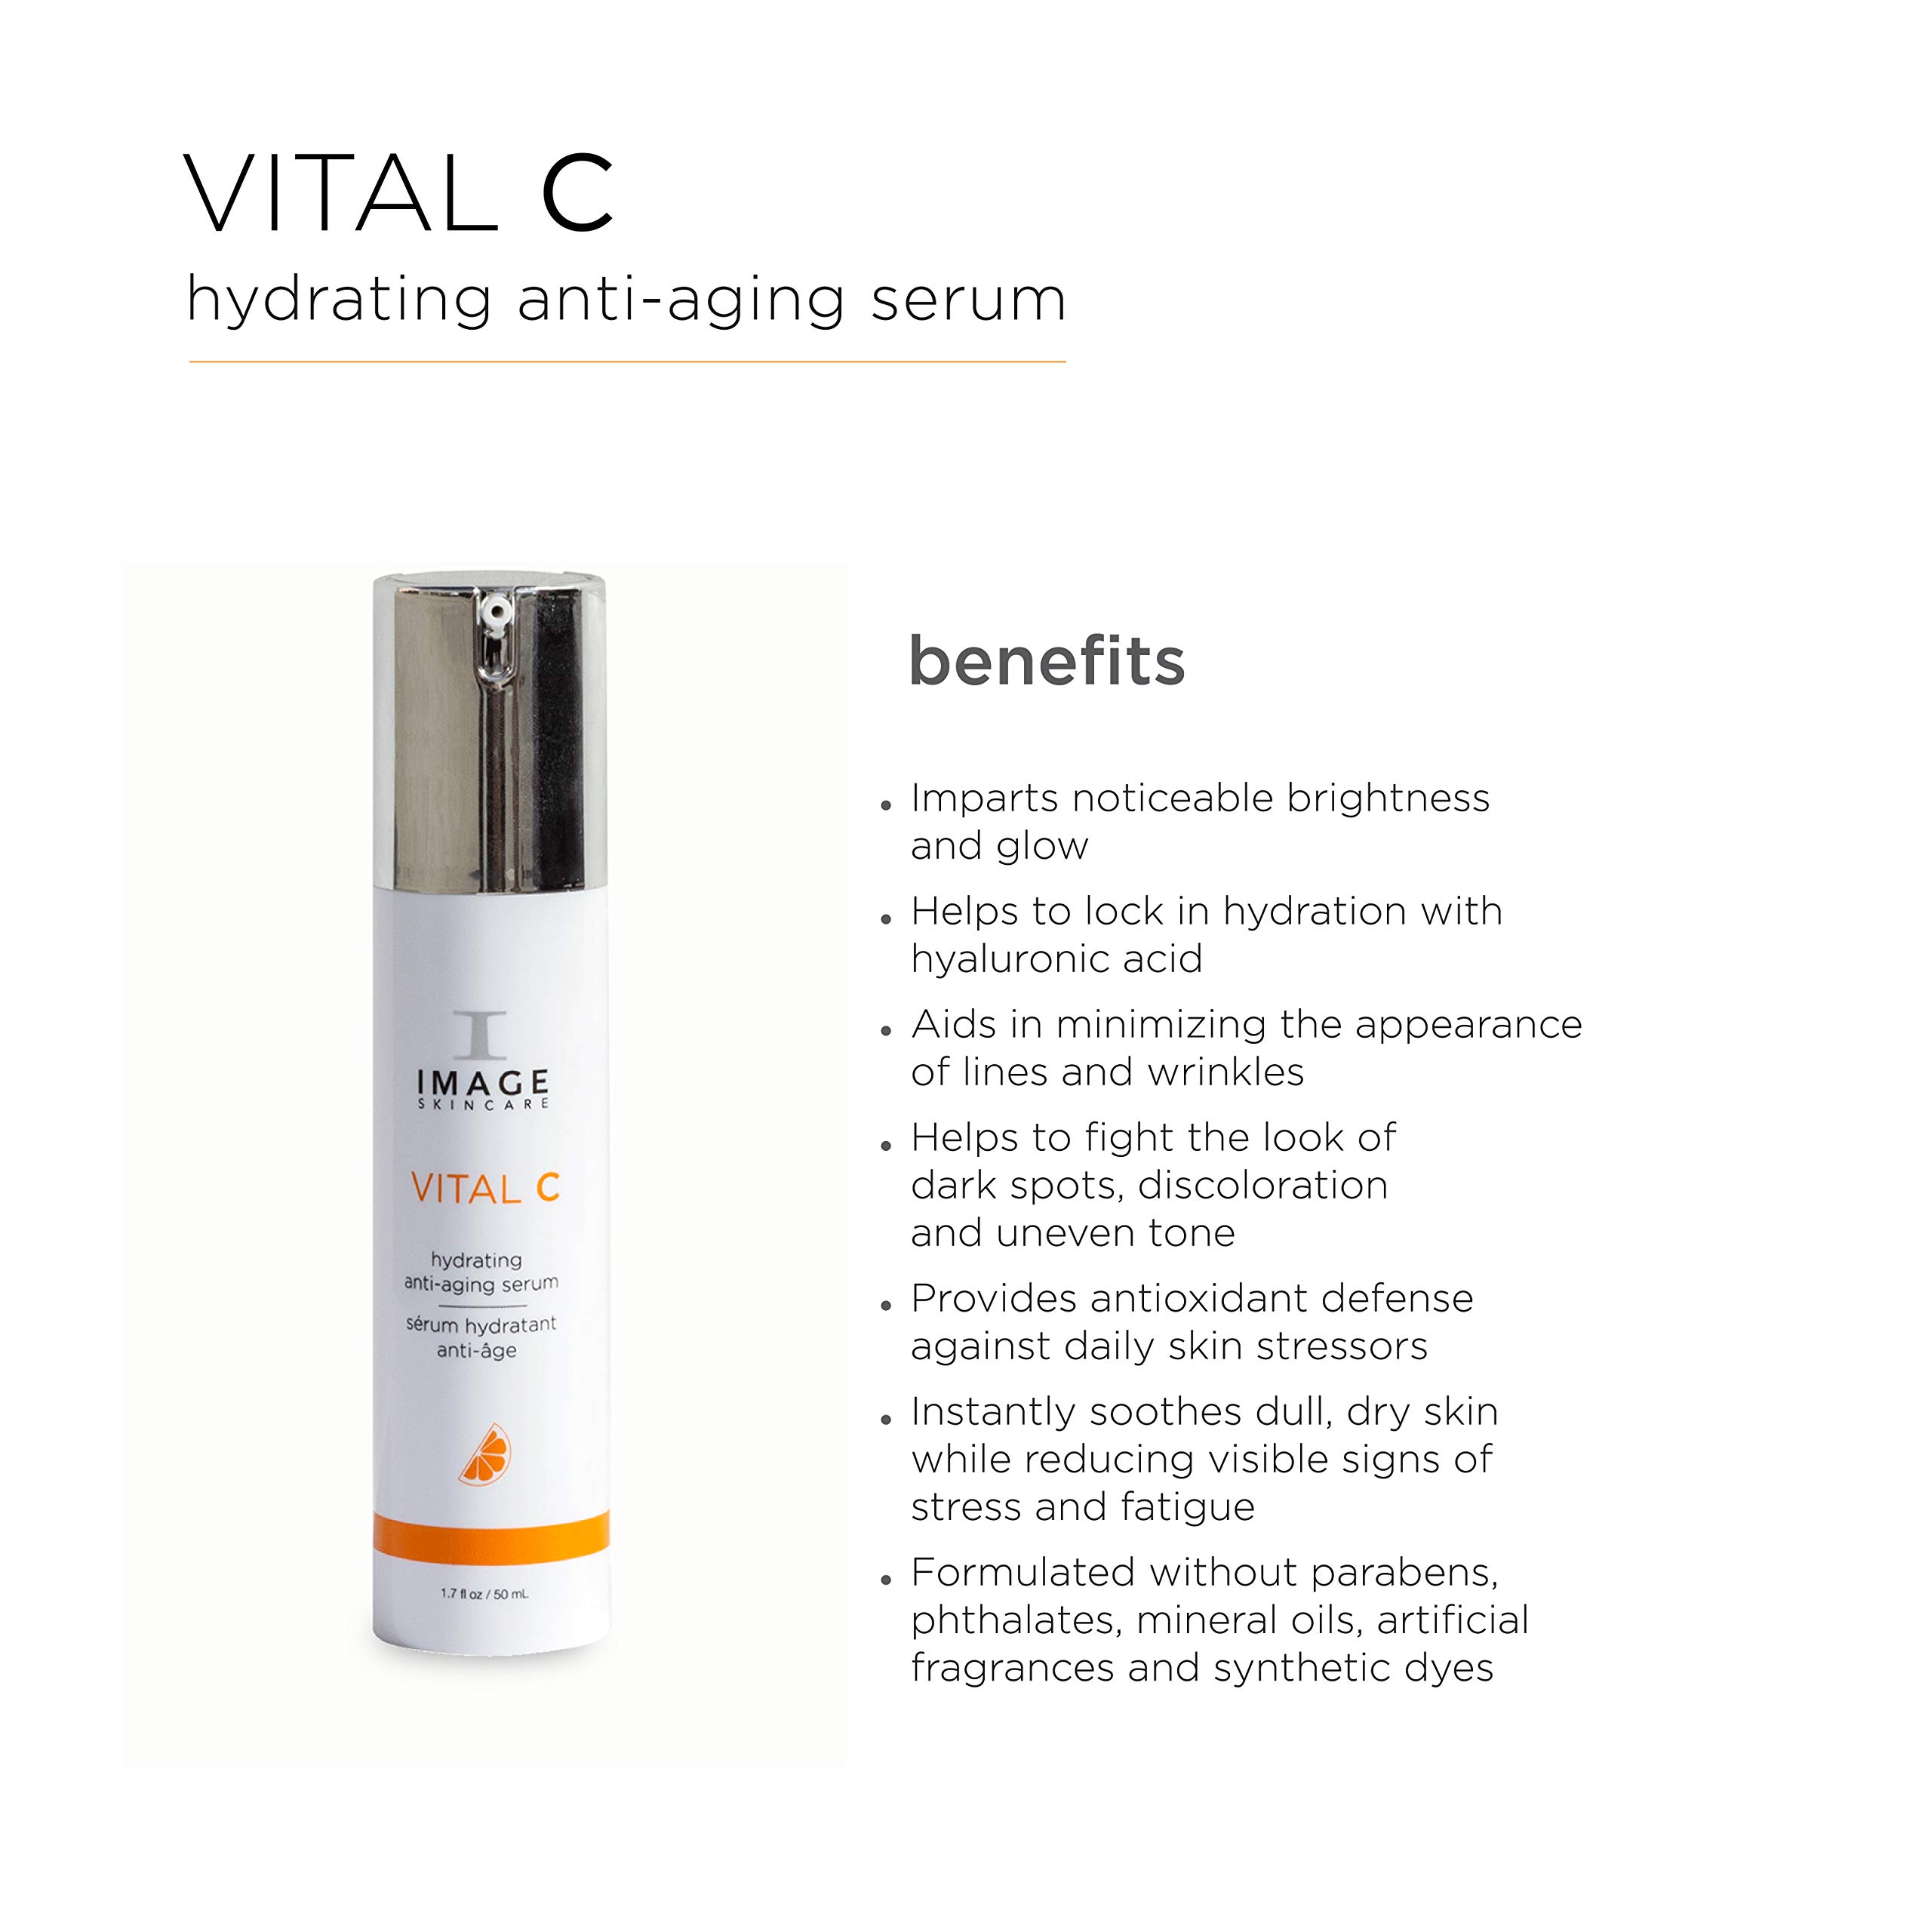 IMAGE Skincare, VITAL C Hydrating Serum, with Potent Vitamin C to Brighten, Tone and Smooth Appearance of Wrinkles, 1.7 fl oz